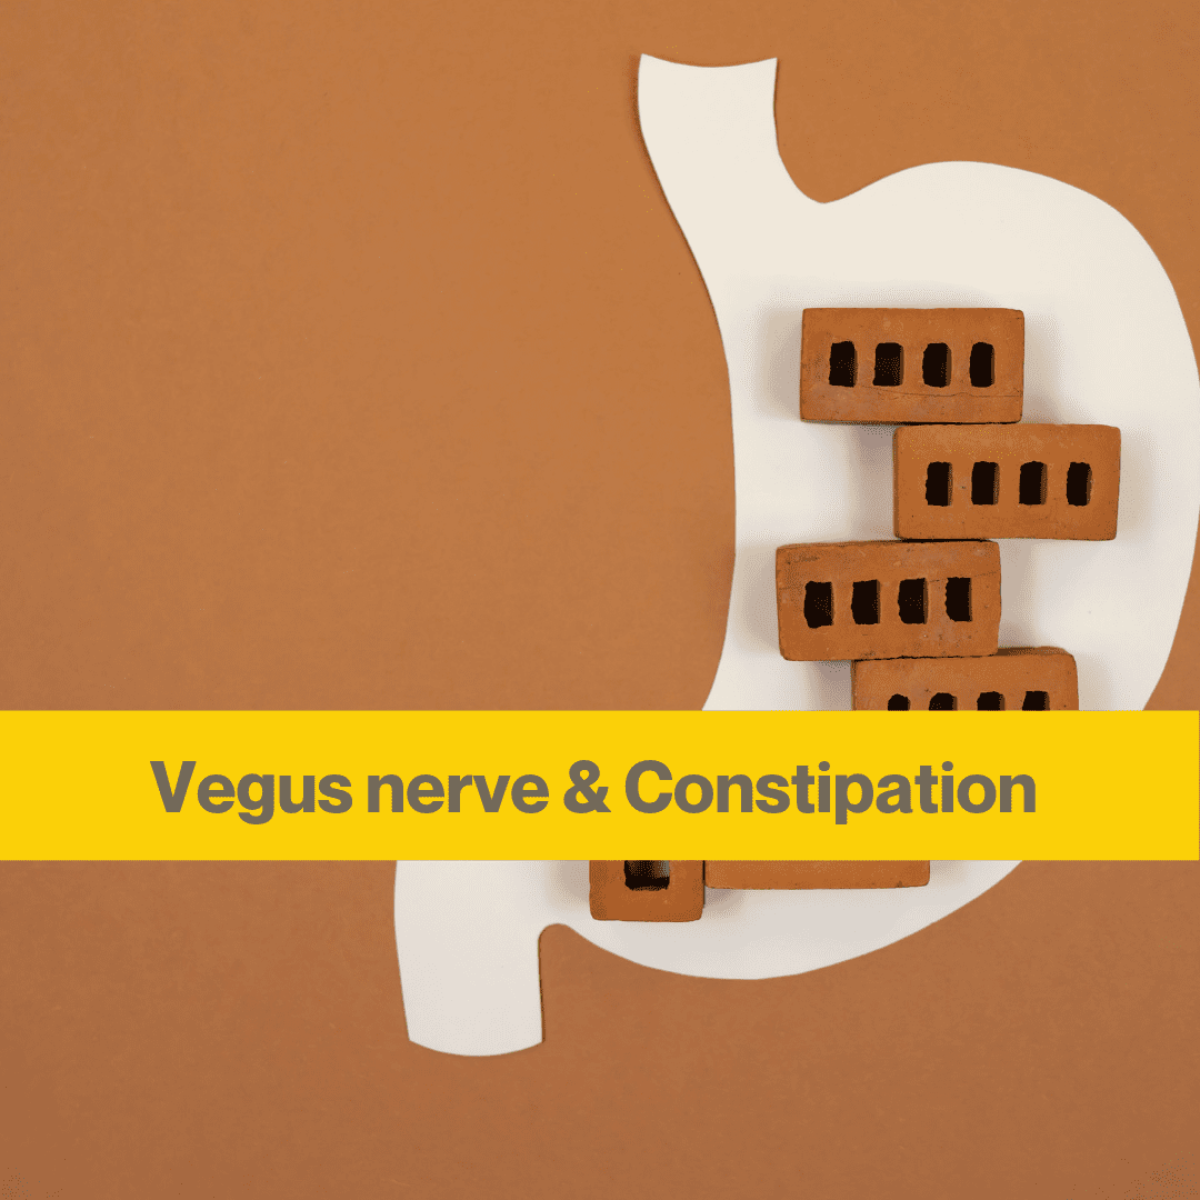 Your vegus nerve and constipation - 7 ways to help